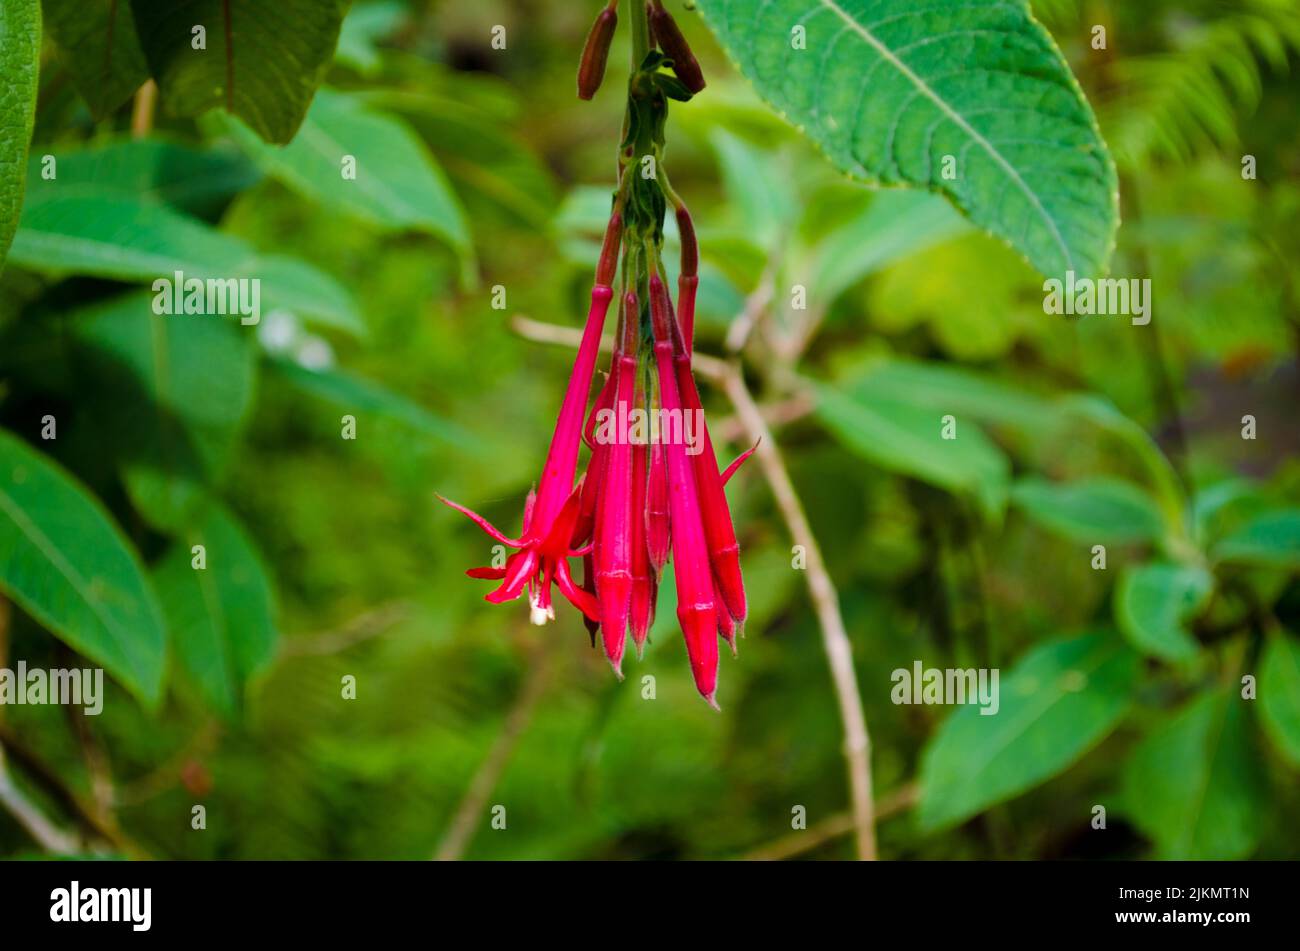 A closeup shot of Fuchsia Boliviana in the gardens of the Sintra castle, Portugal Stock Photo